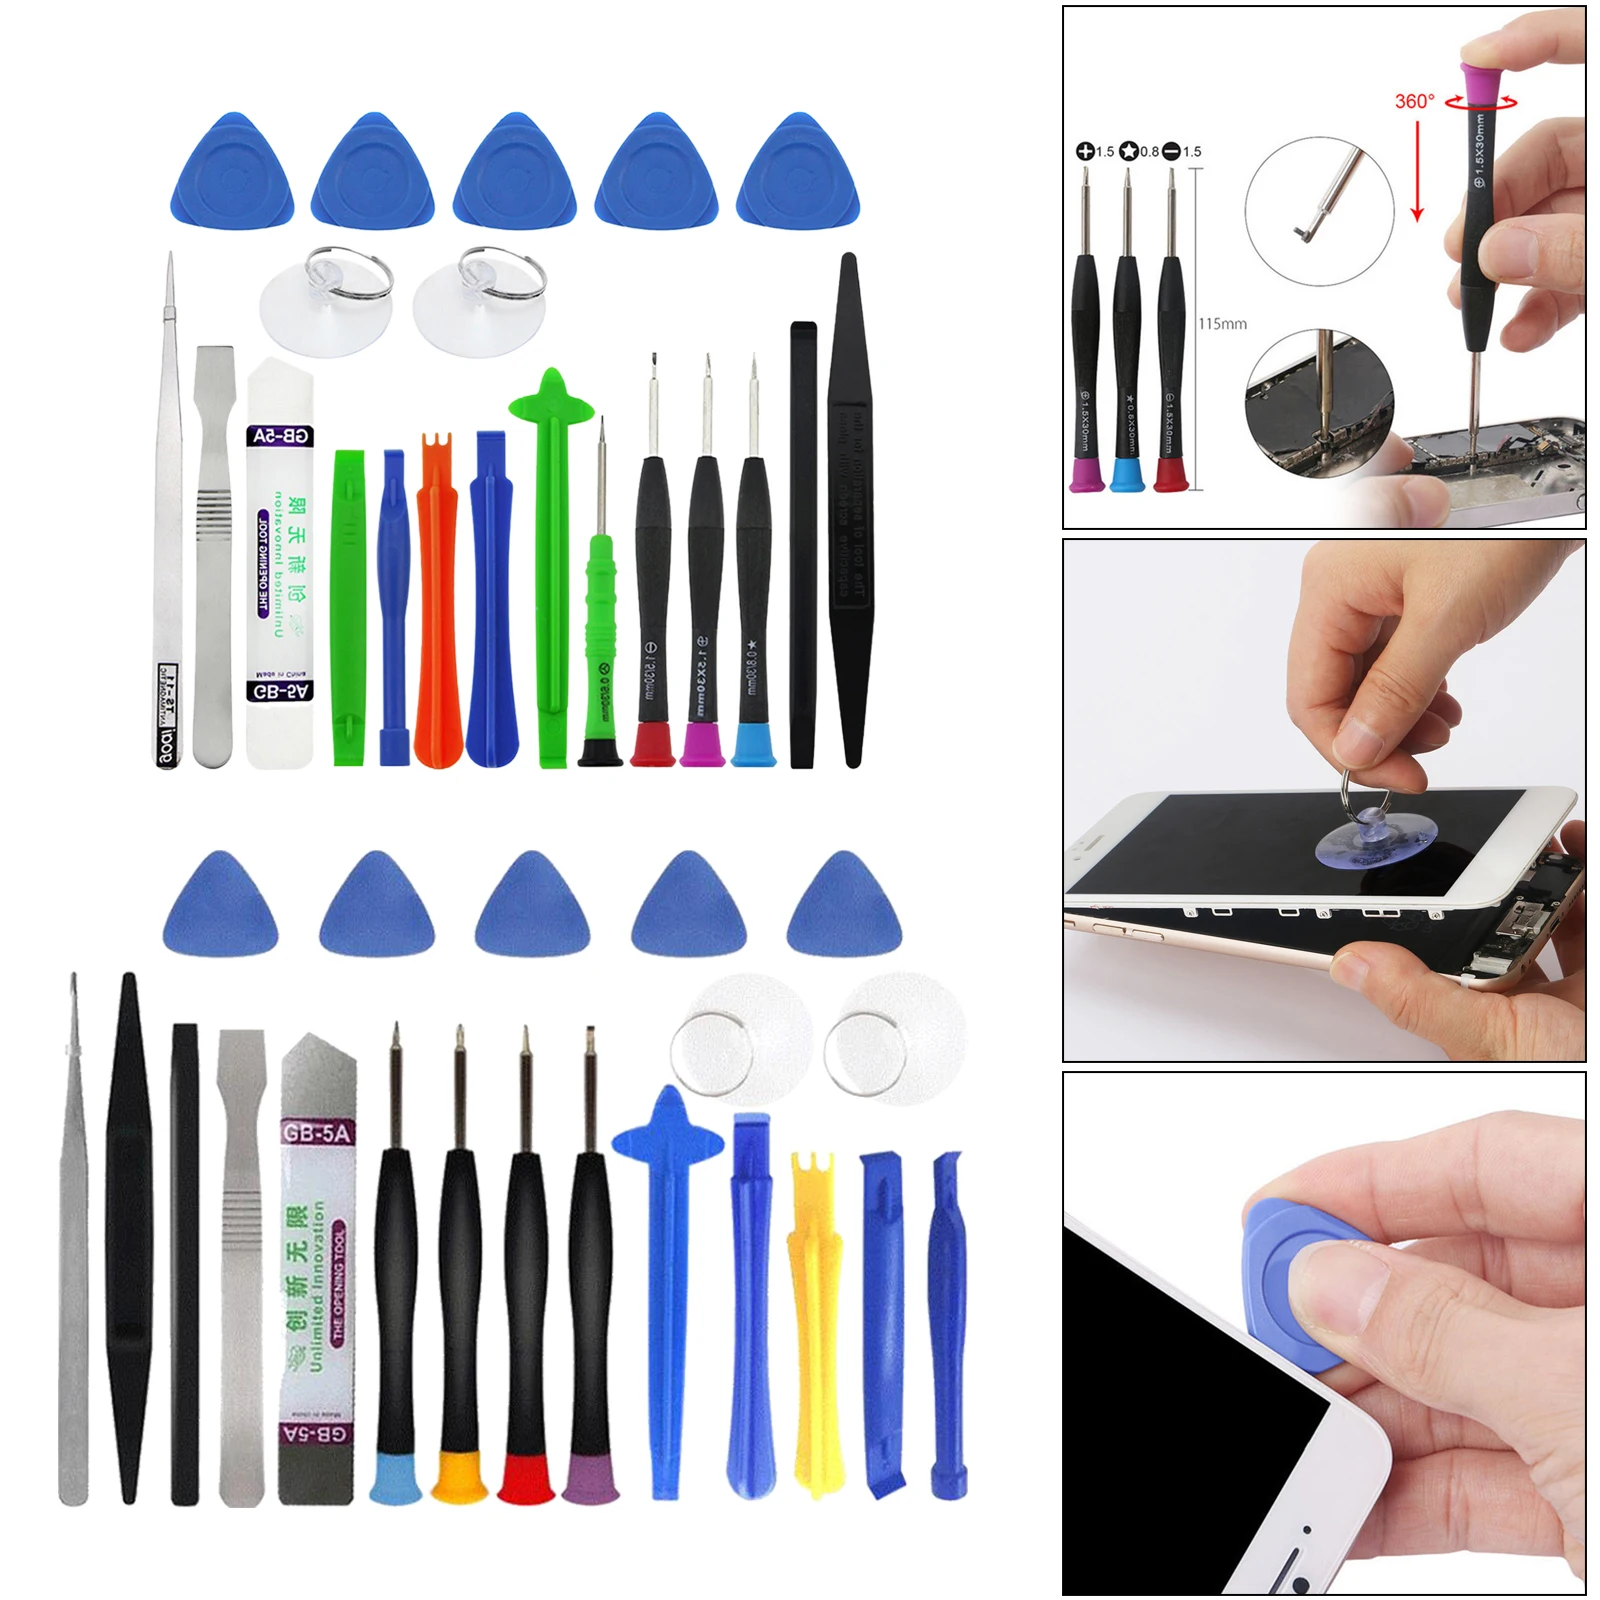 Professional Electronics Opening Pry Tool Kit with Metal Spudger Anti-Static Tweezers for Cellphone iPhone Laptops and More